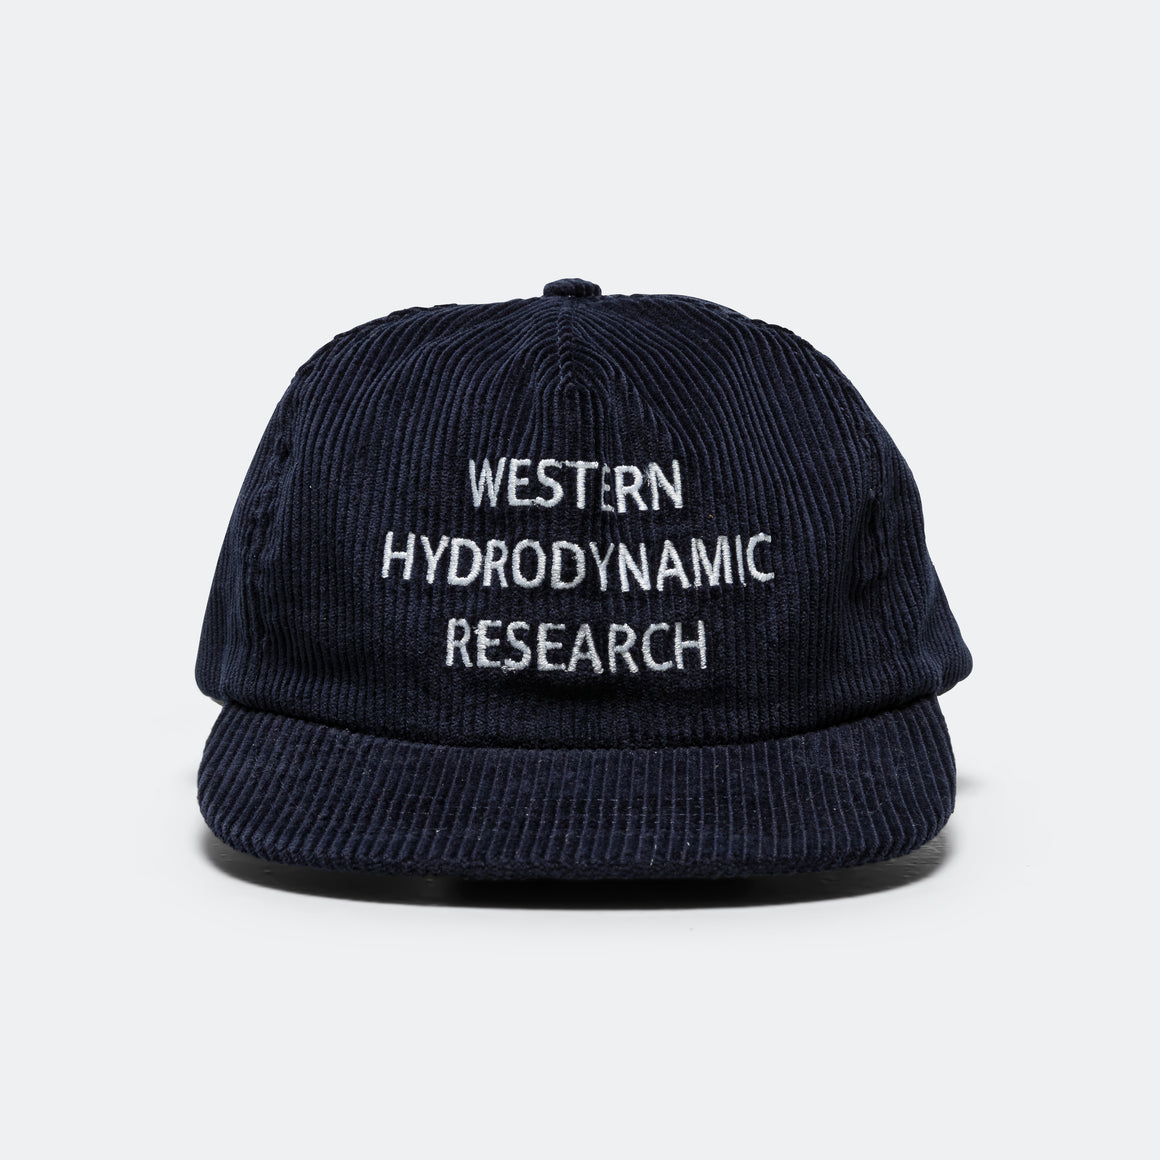 Western Hydrodynamic Research - Whale Cord Hat - Navy - UP THERE